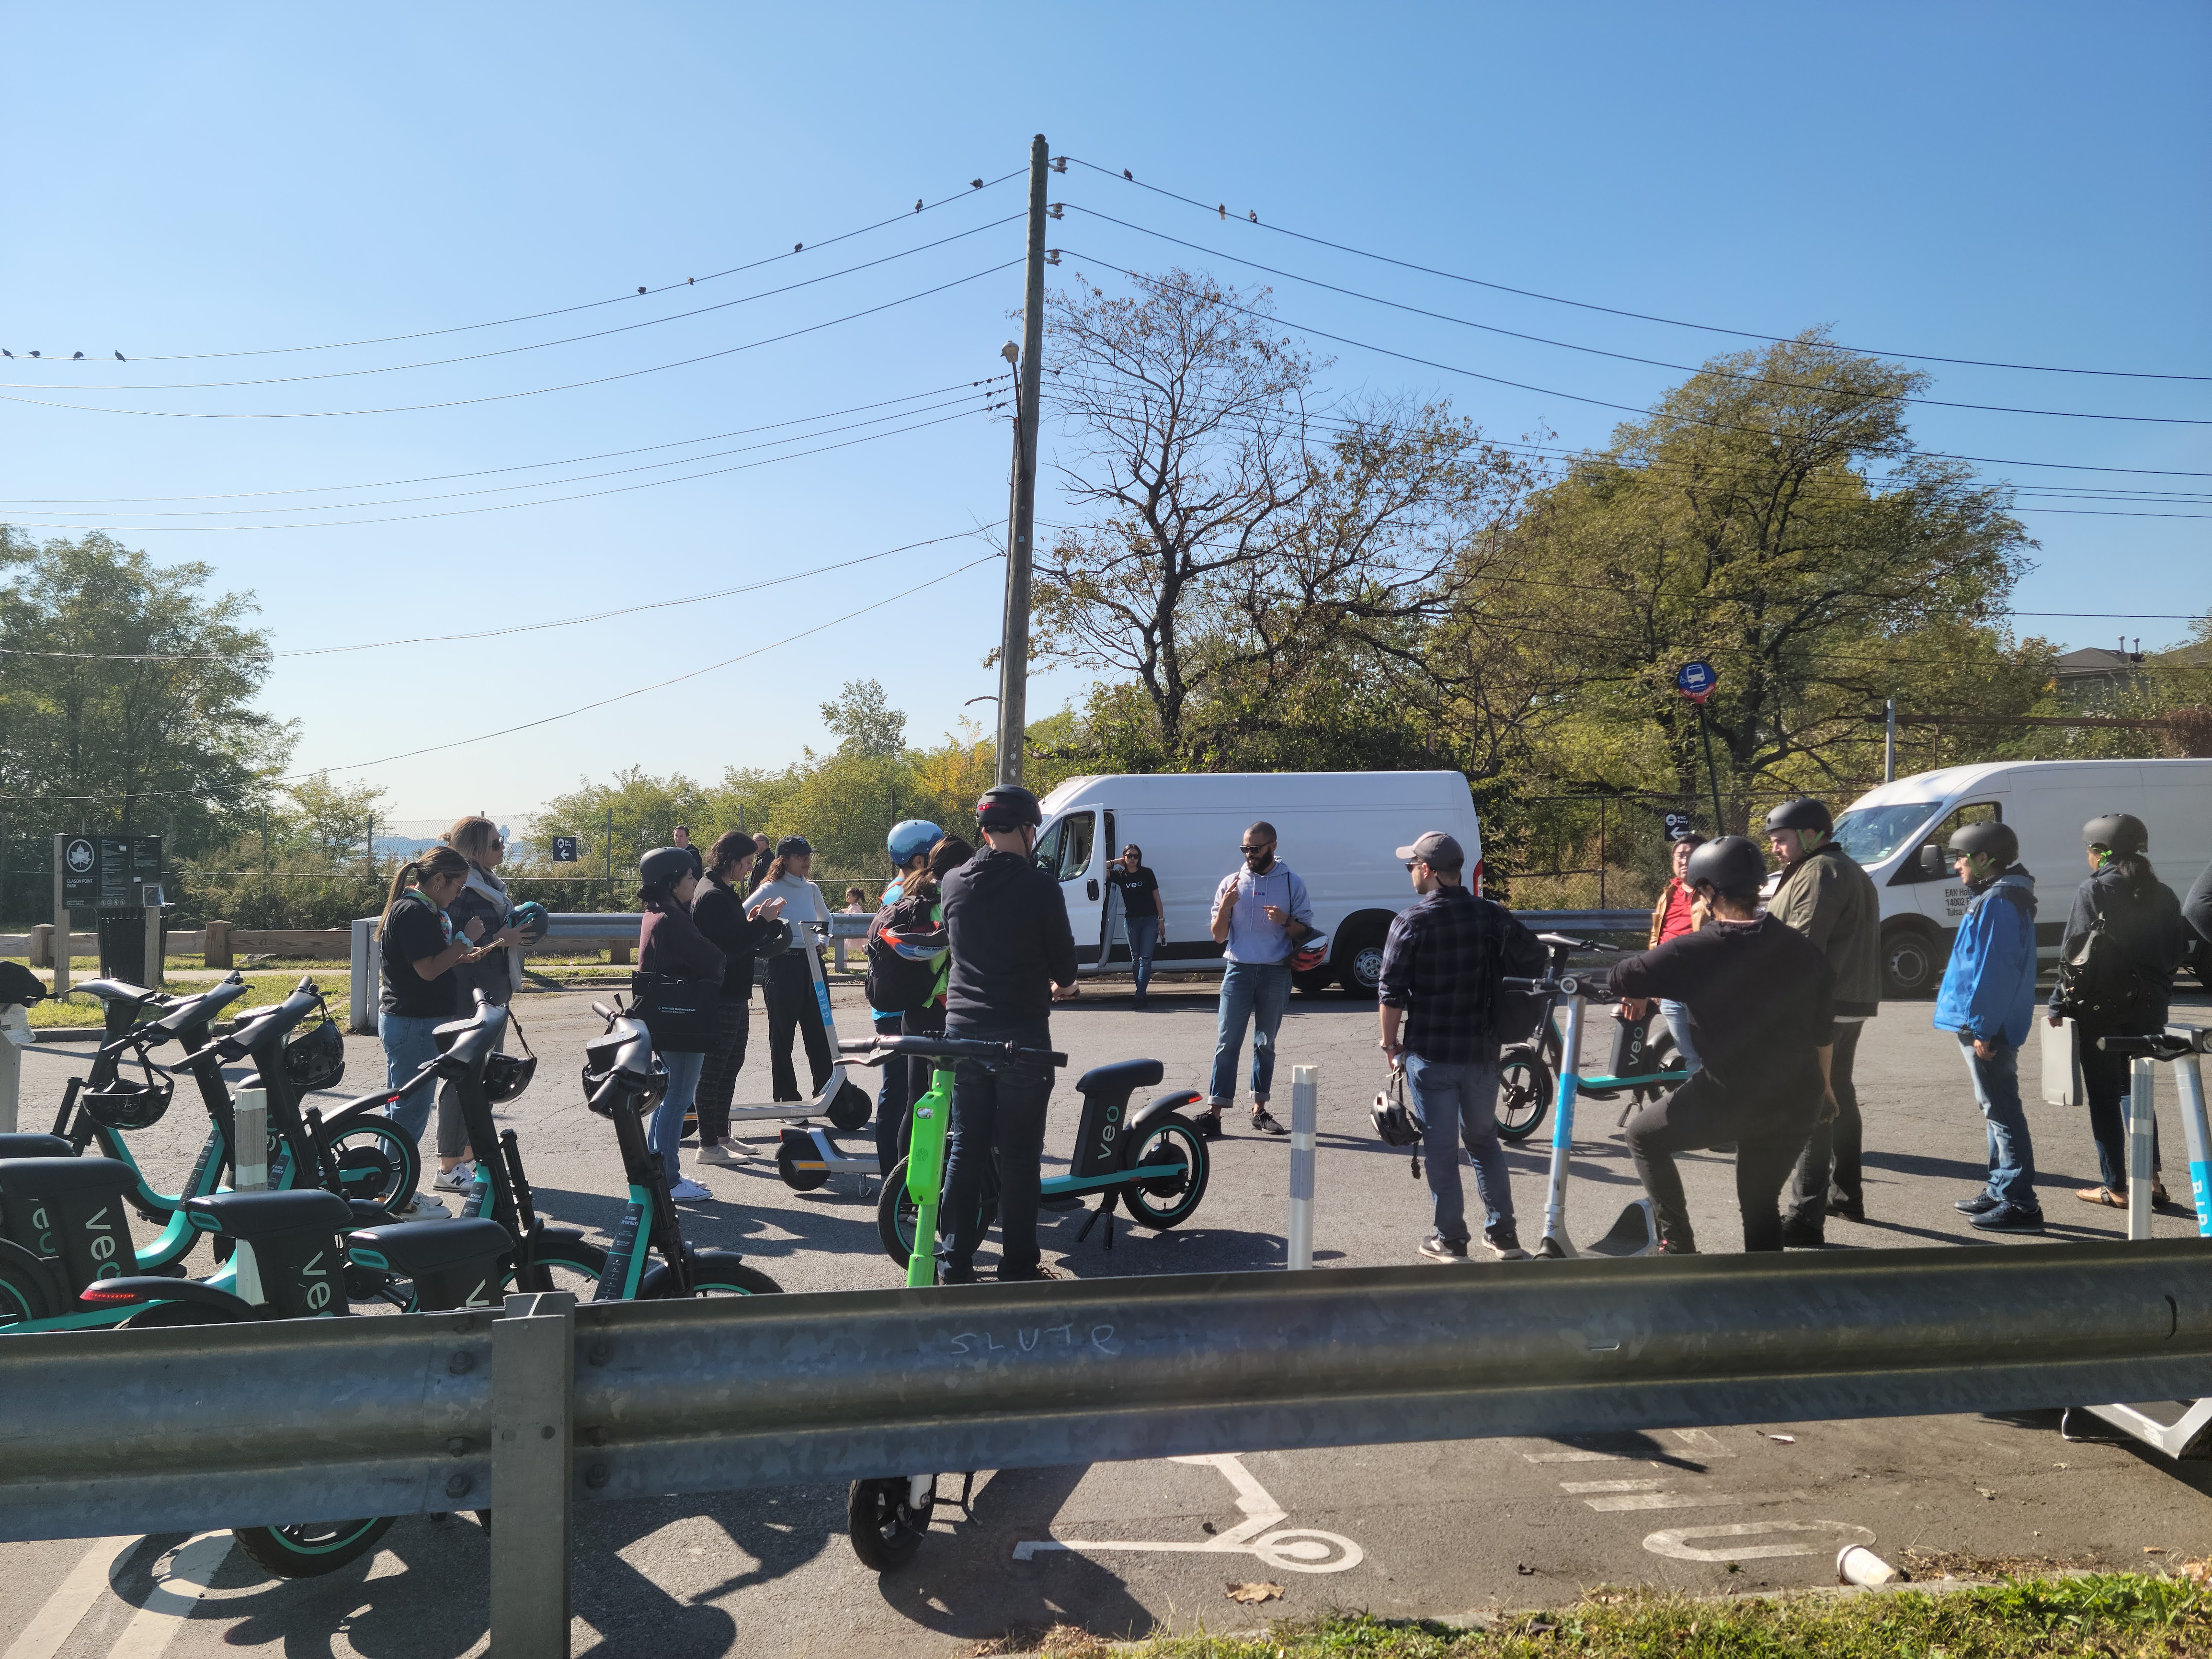 The group in a circle, discussing e-scooters 